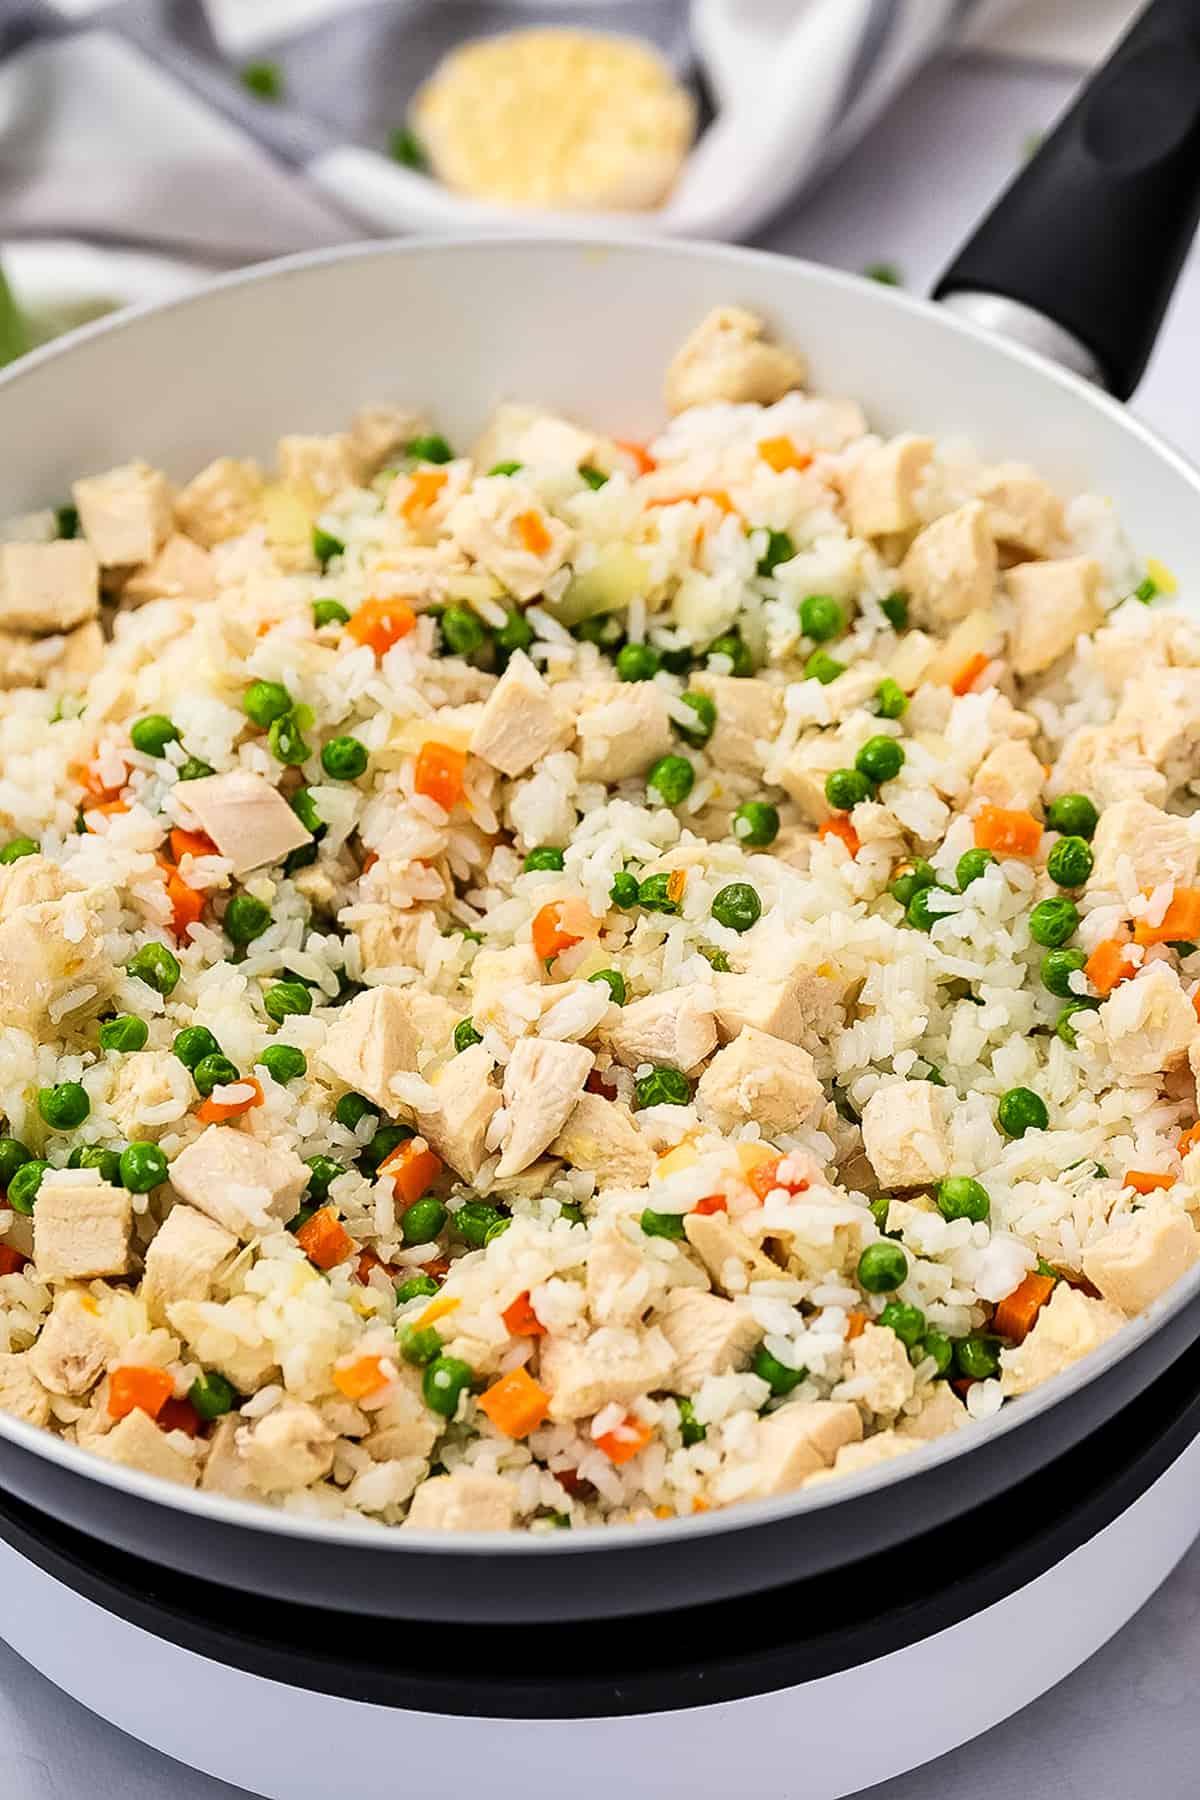 Skillet with chicken, peas and carrots